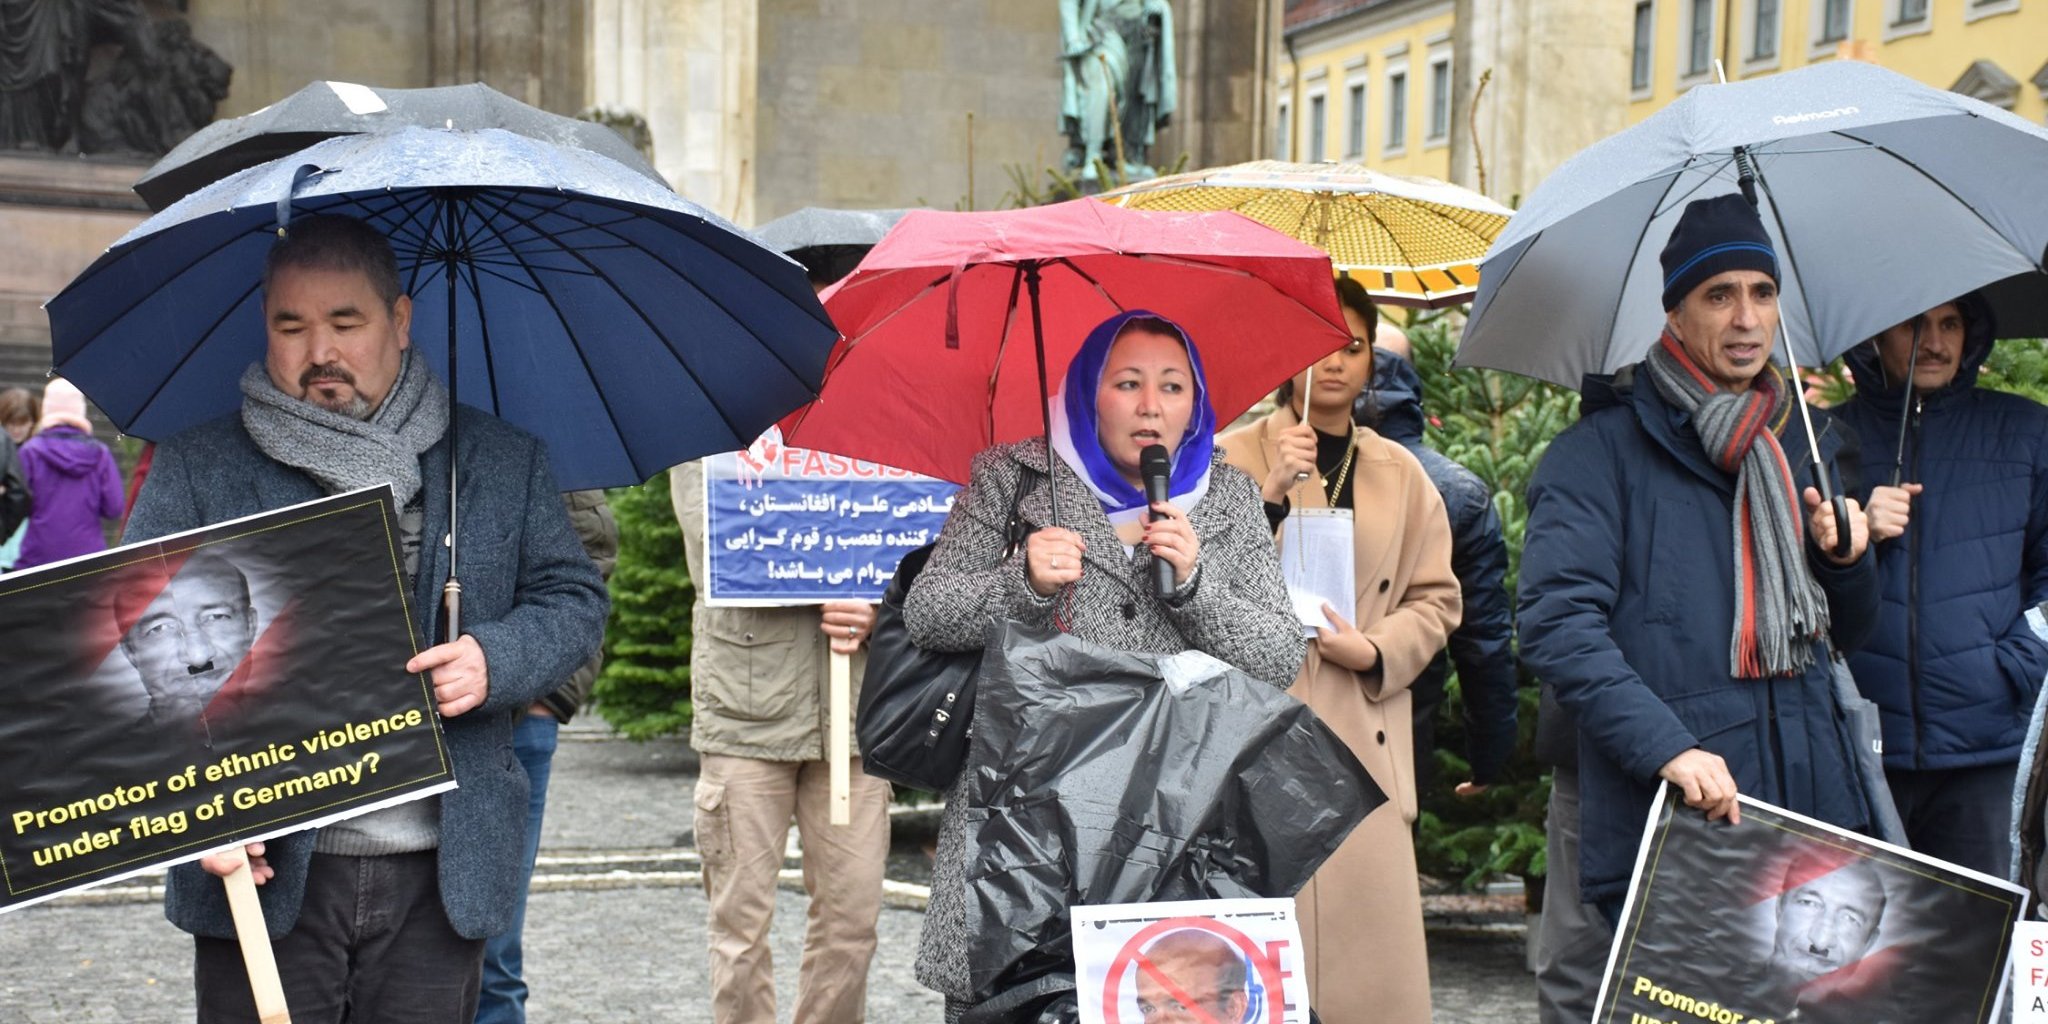 Munich: Protest Against Afghan Nazism and Fascism